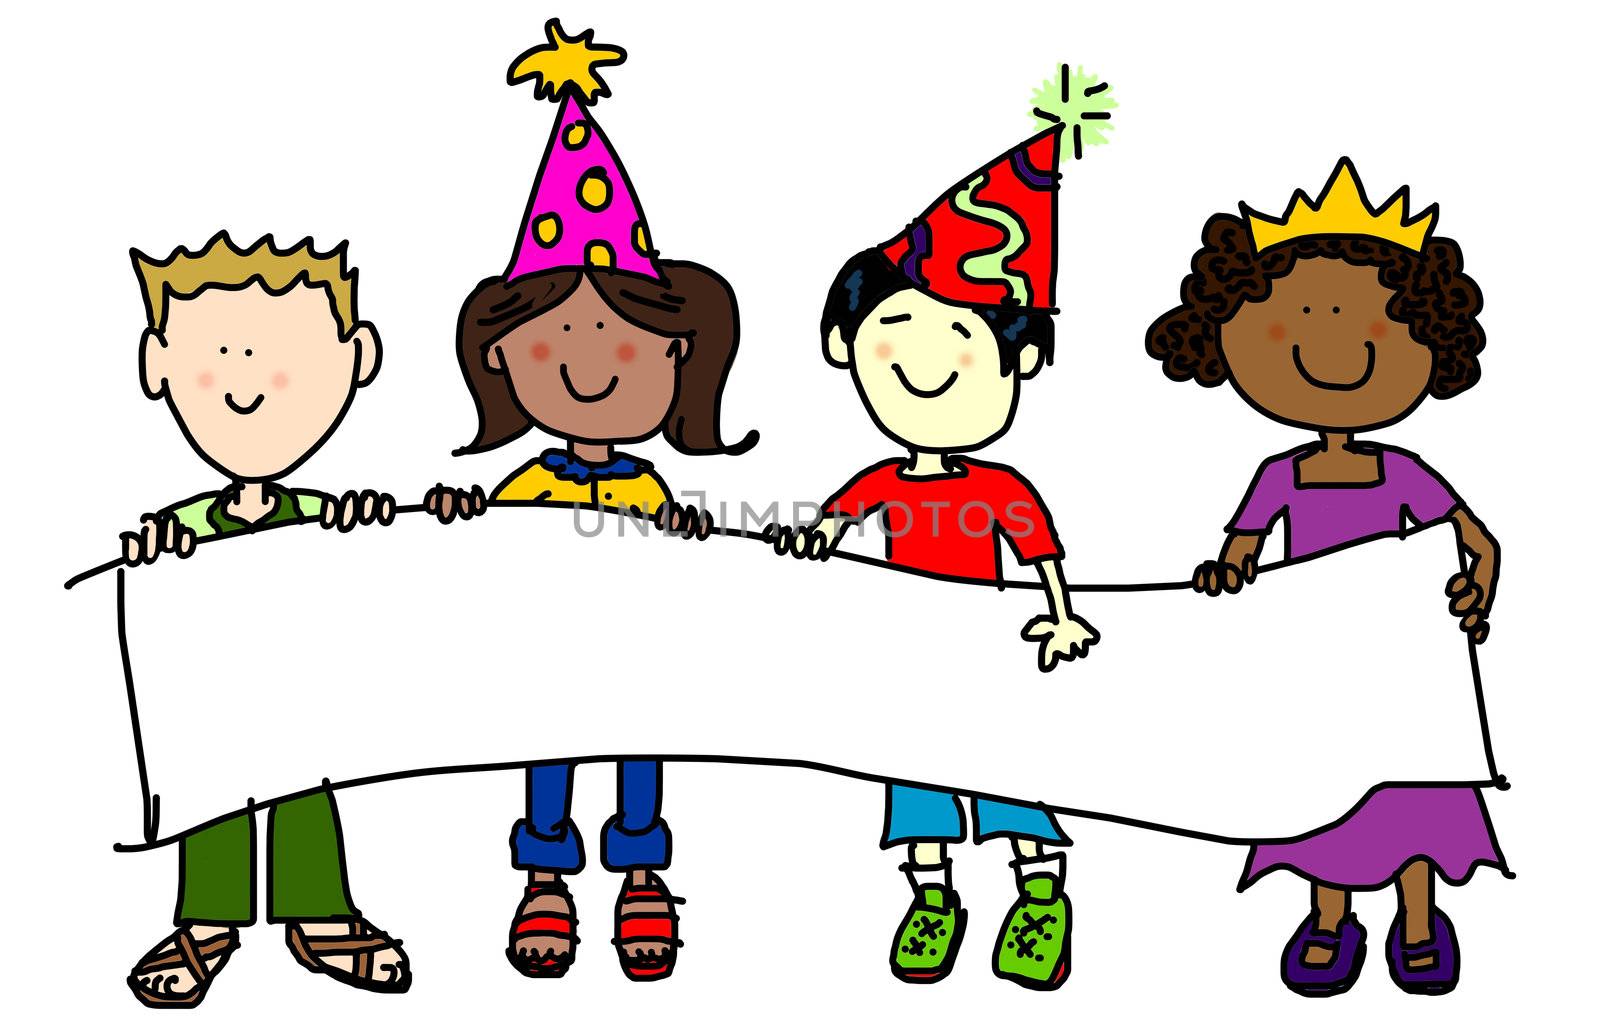 Party hat kids with banner by Mirage3